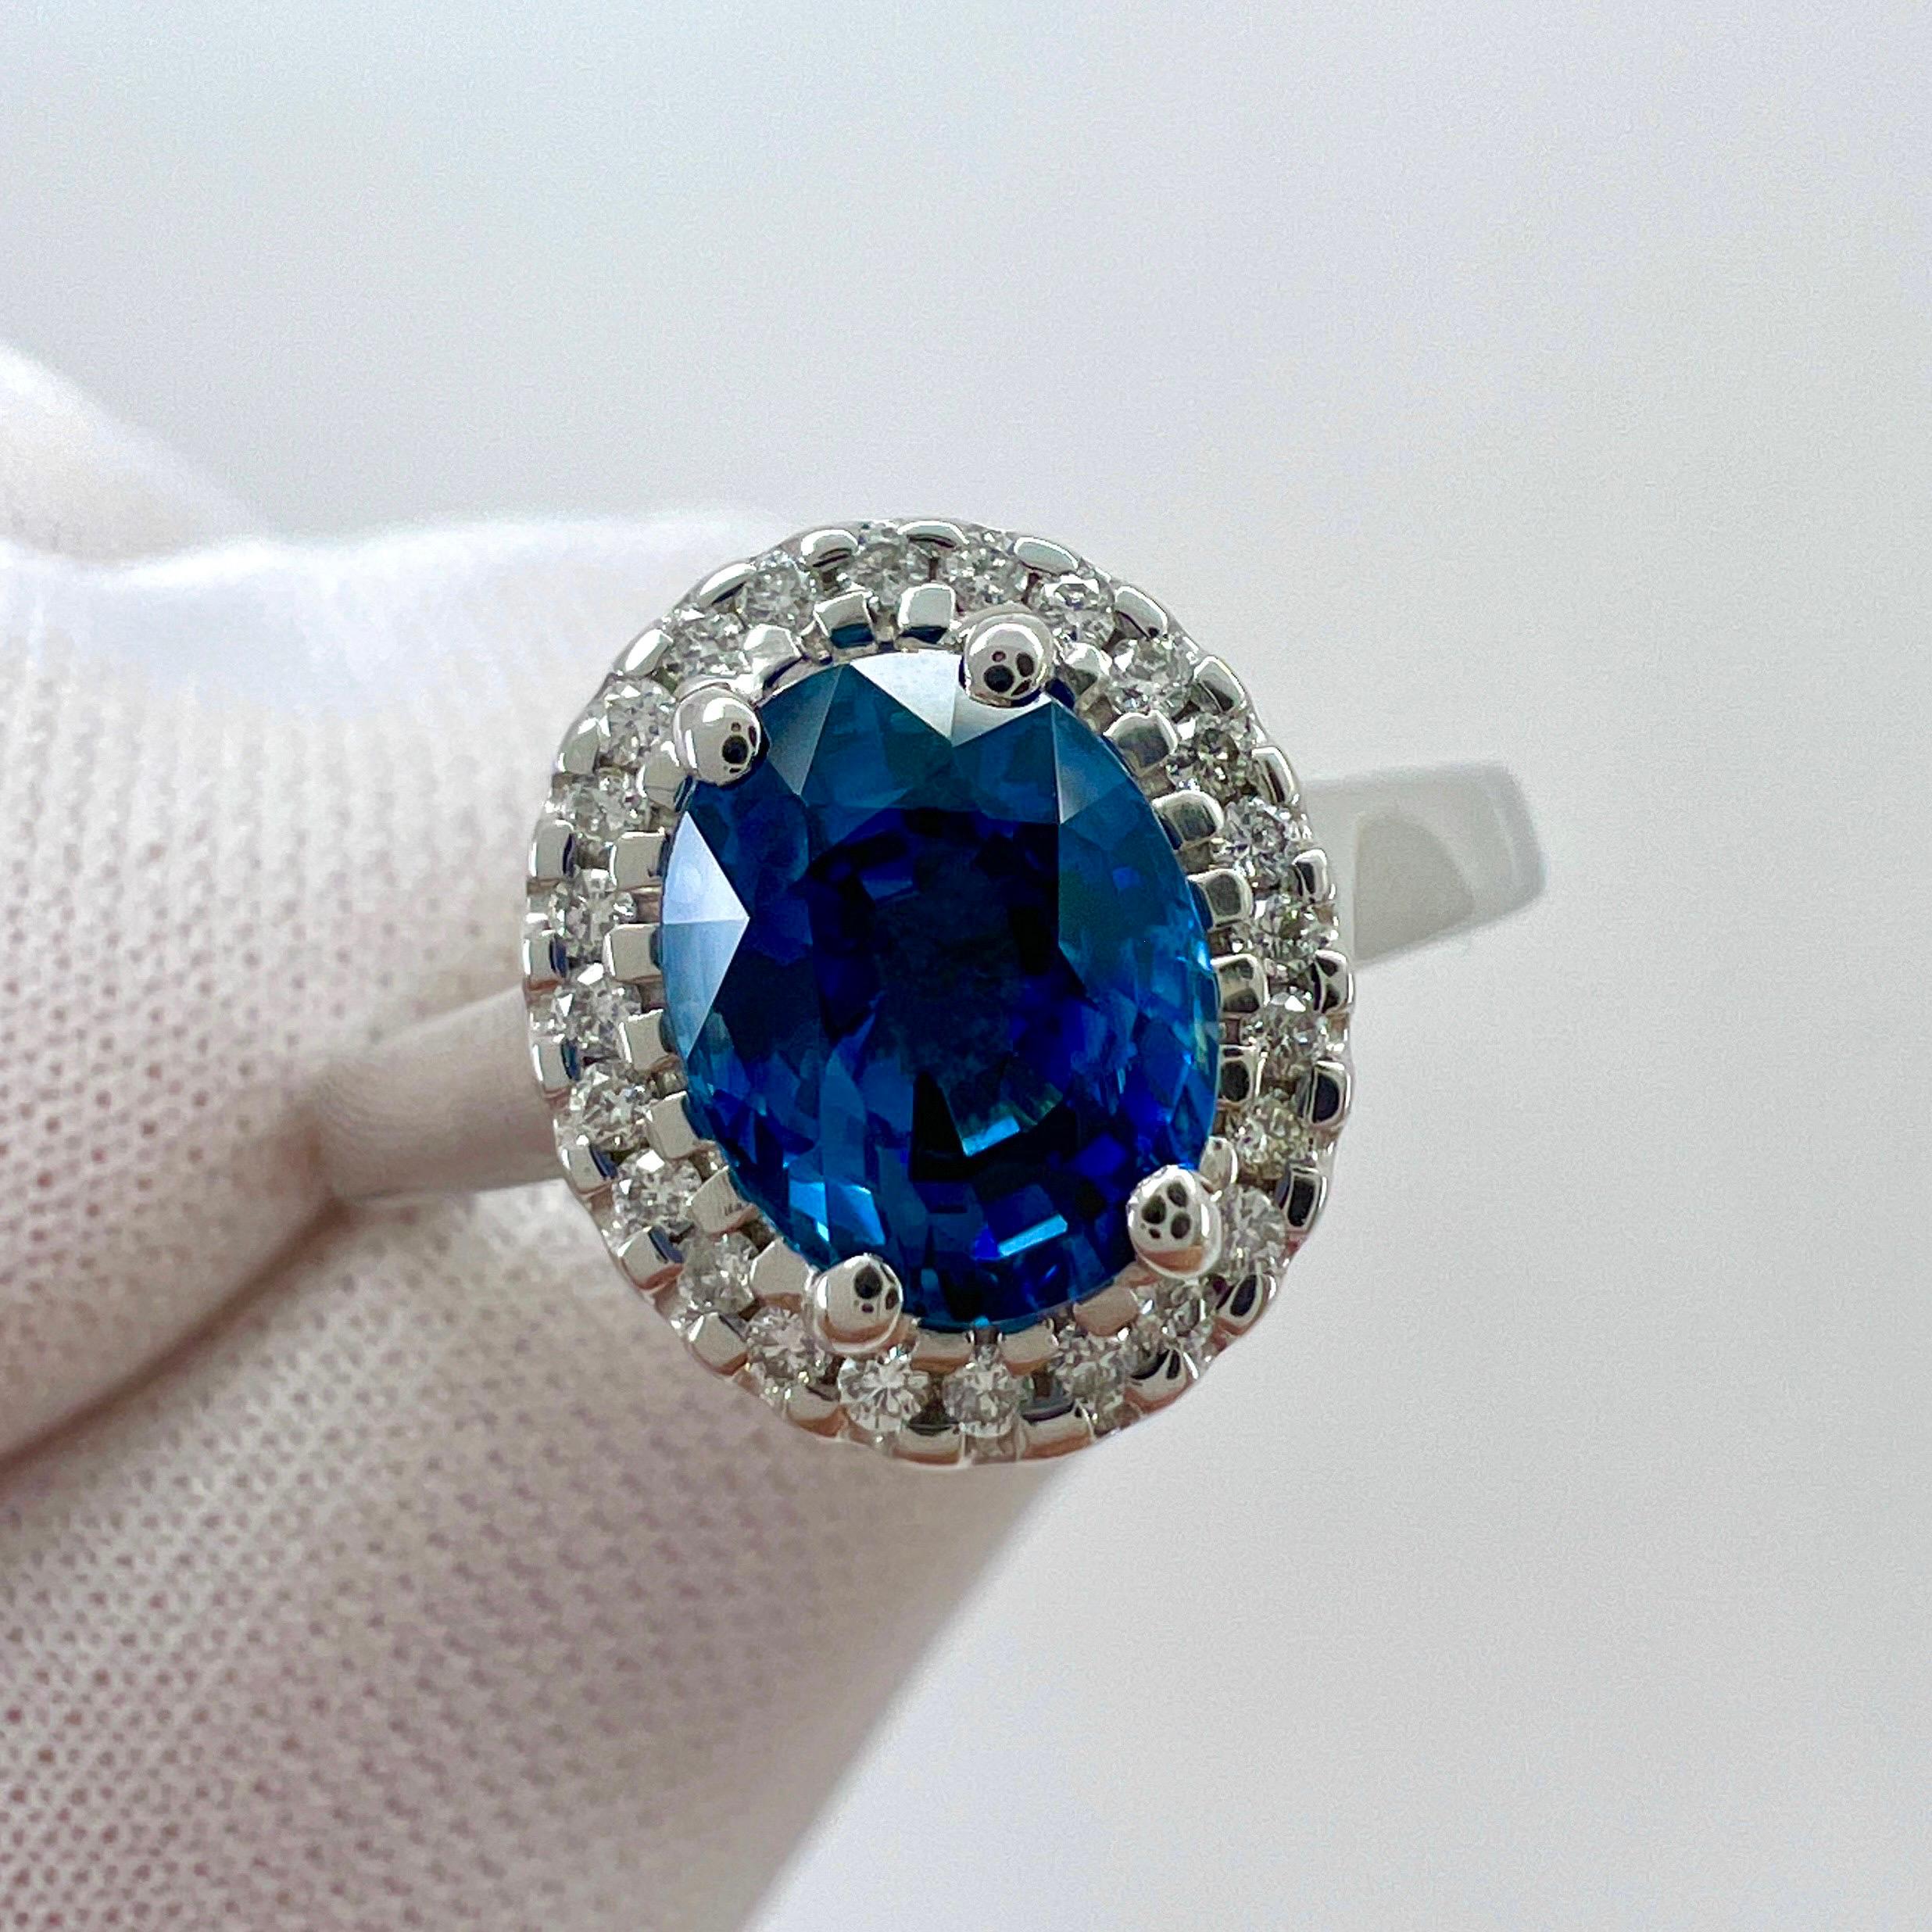 Fine Ceylon Blue Oval Cut Sapphire & Diamond 18k White Gold Halo Ring.

1.56 Carat centre Ceylon sapphire with a beautiful vivid blue colour and excellent clarity. VVS.
This sapphire is Sri Lankan in origin (Ceylon), source of some of the finest